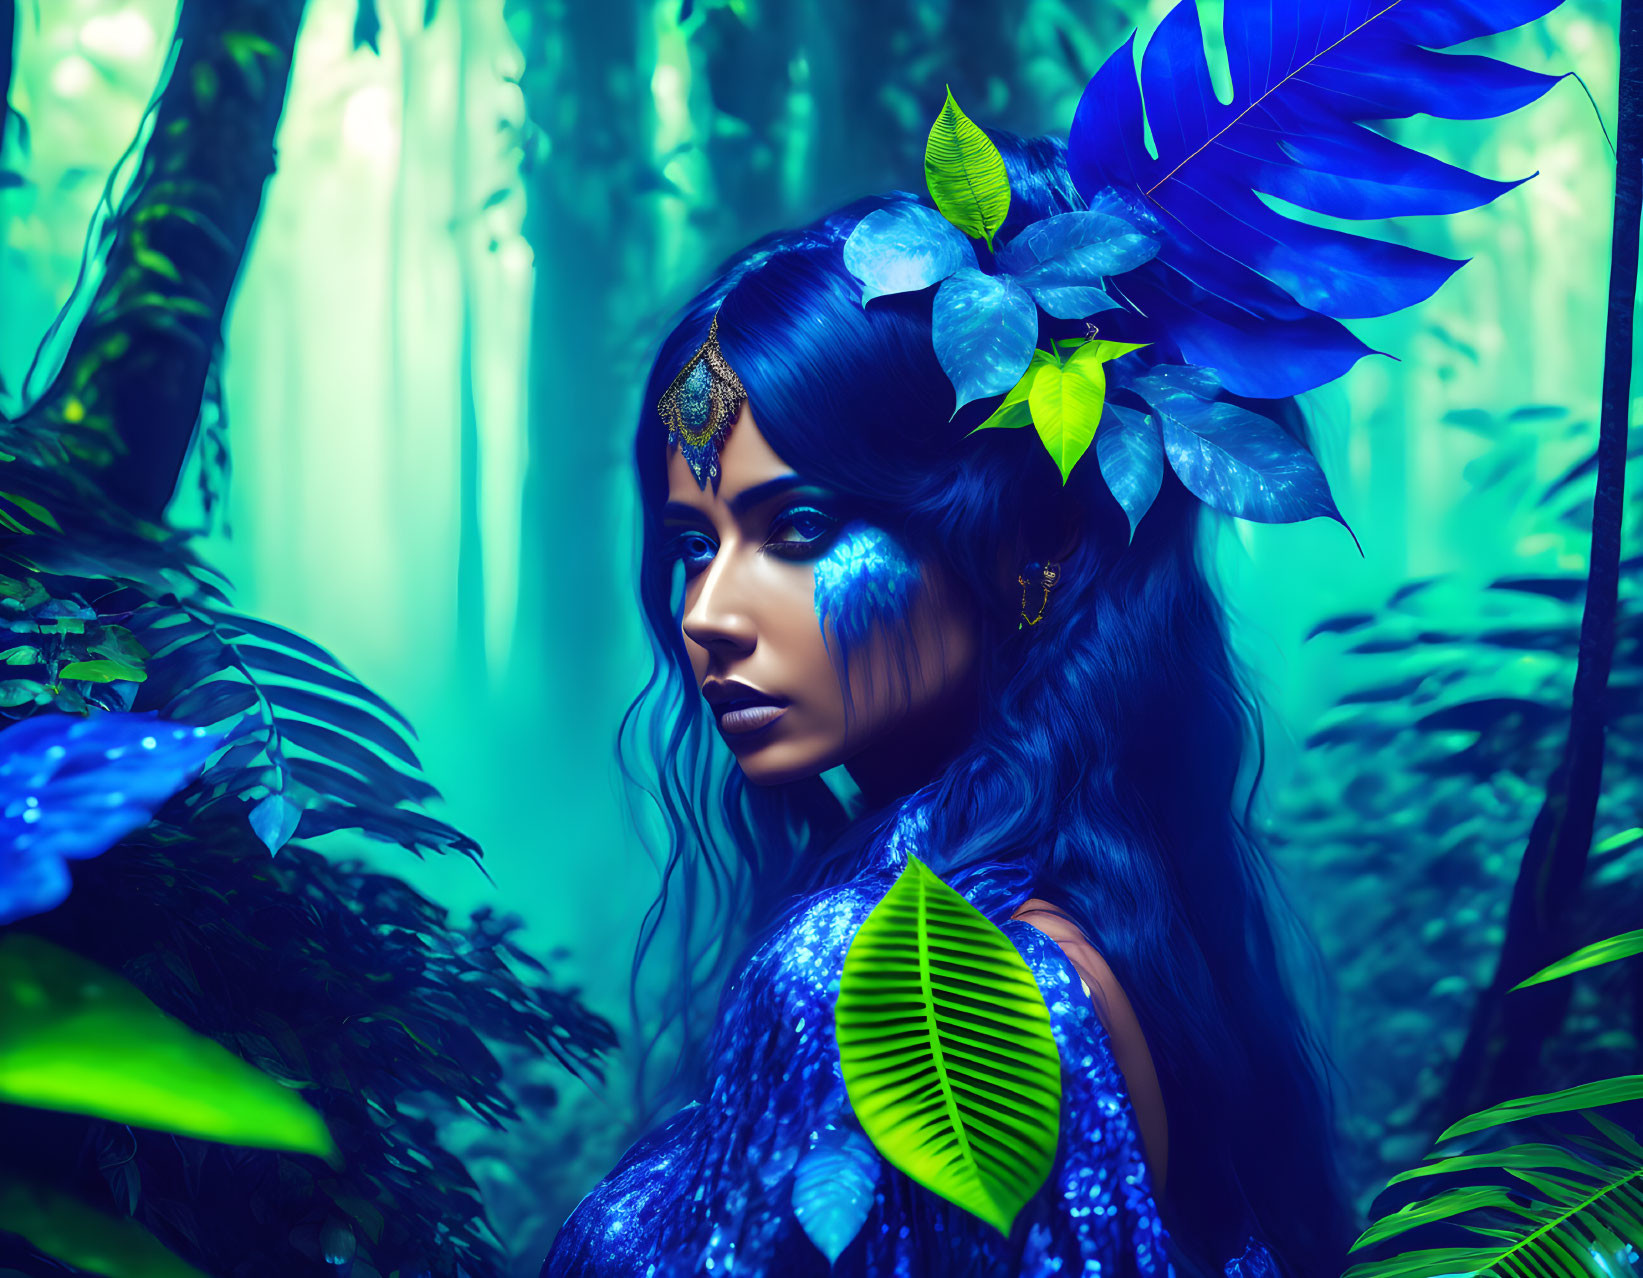 Blue-skinned woman with leaf and feather adornments in mystical forest scene